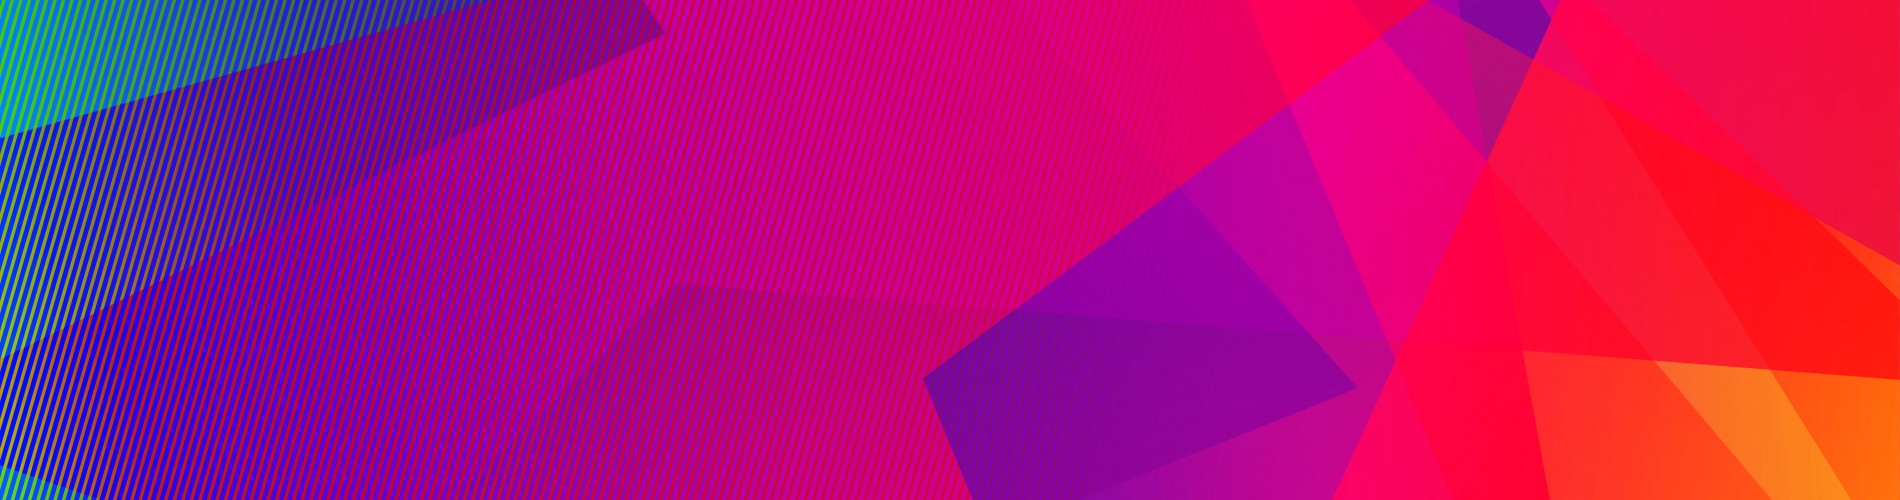 Purple, pink and orange coloured background banner